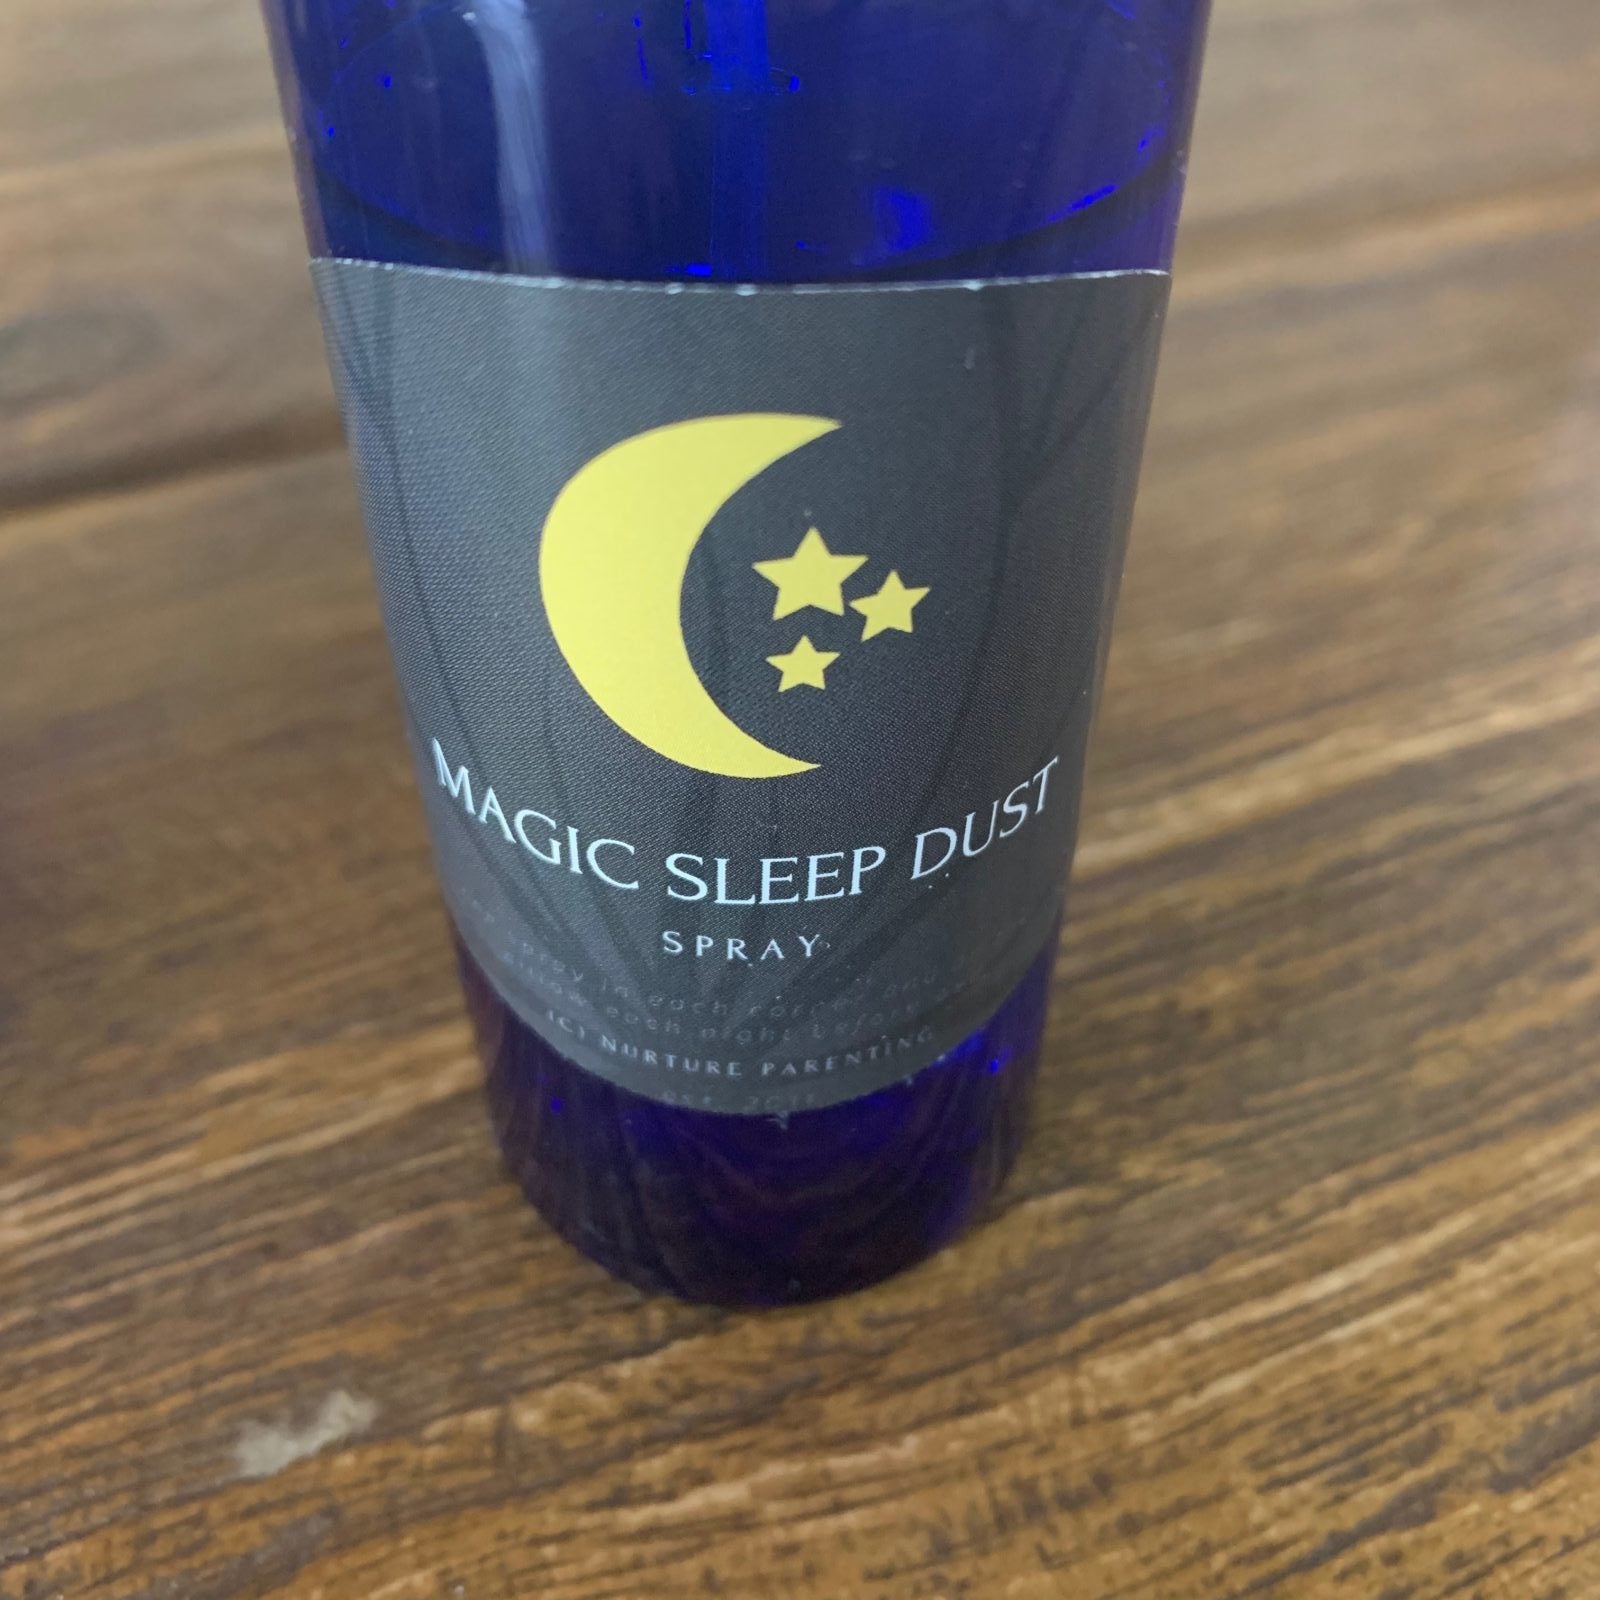 Magic Sleep Dust & Monsters and Ghosts Be Gone Spray